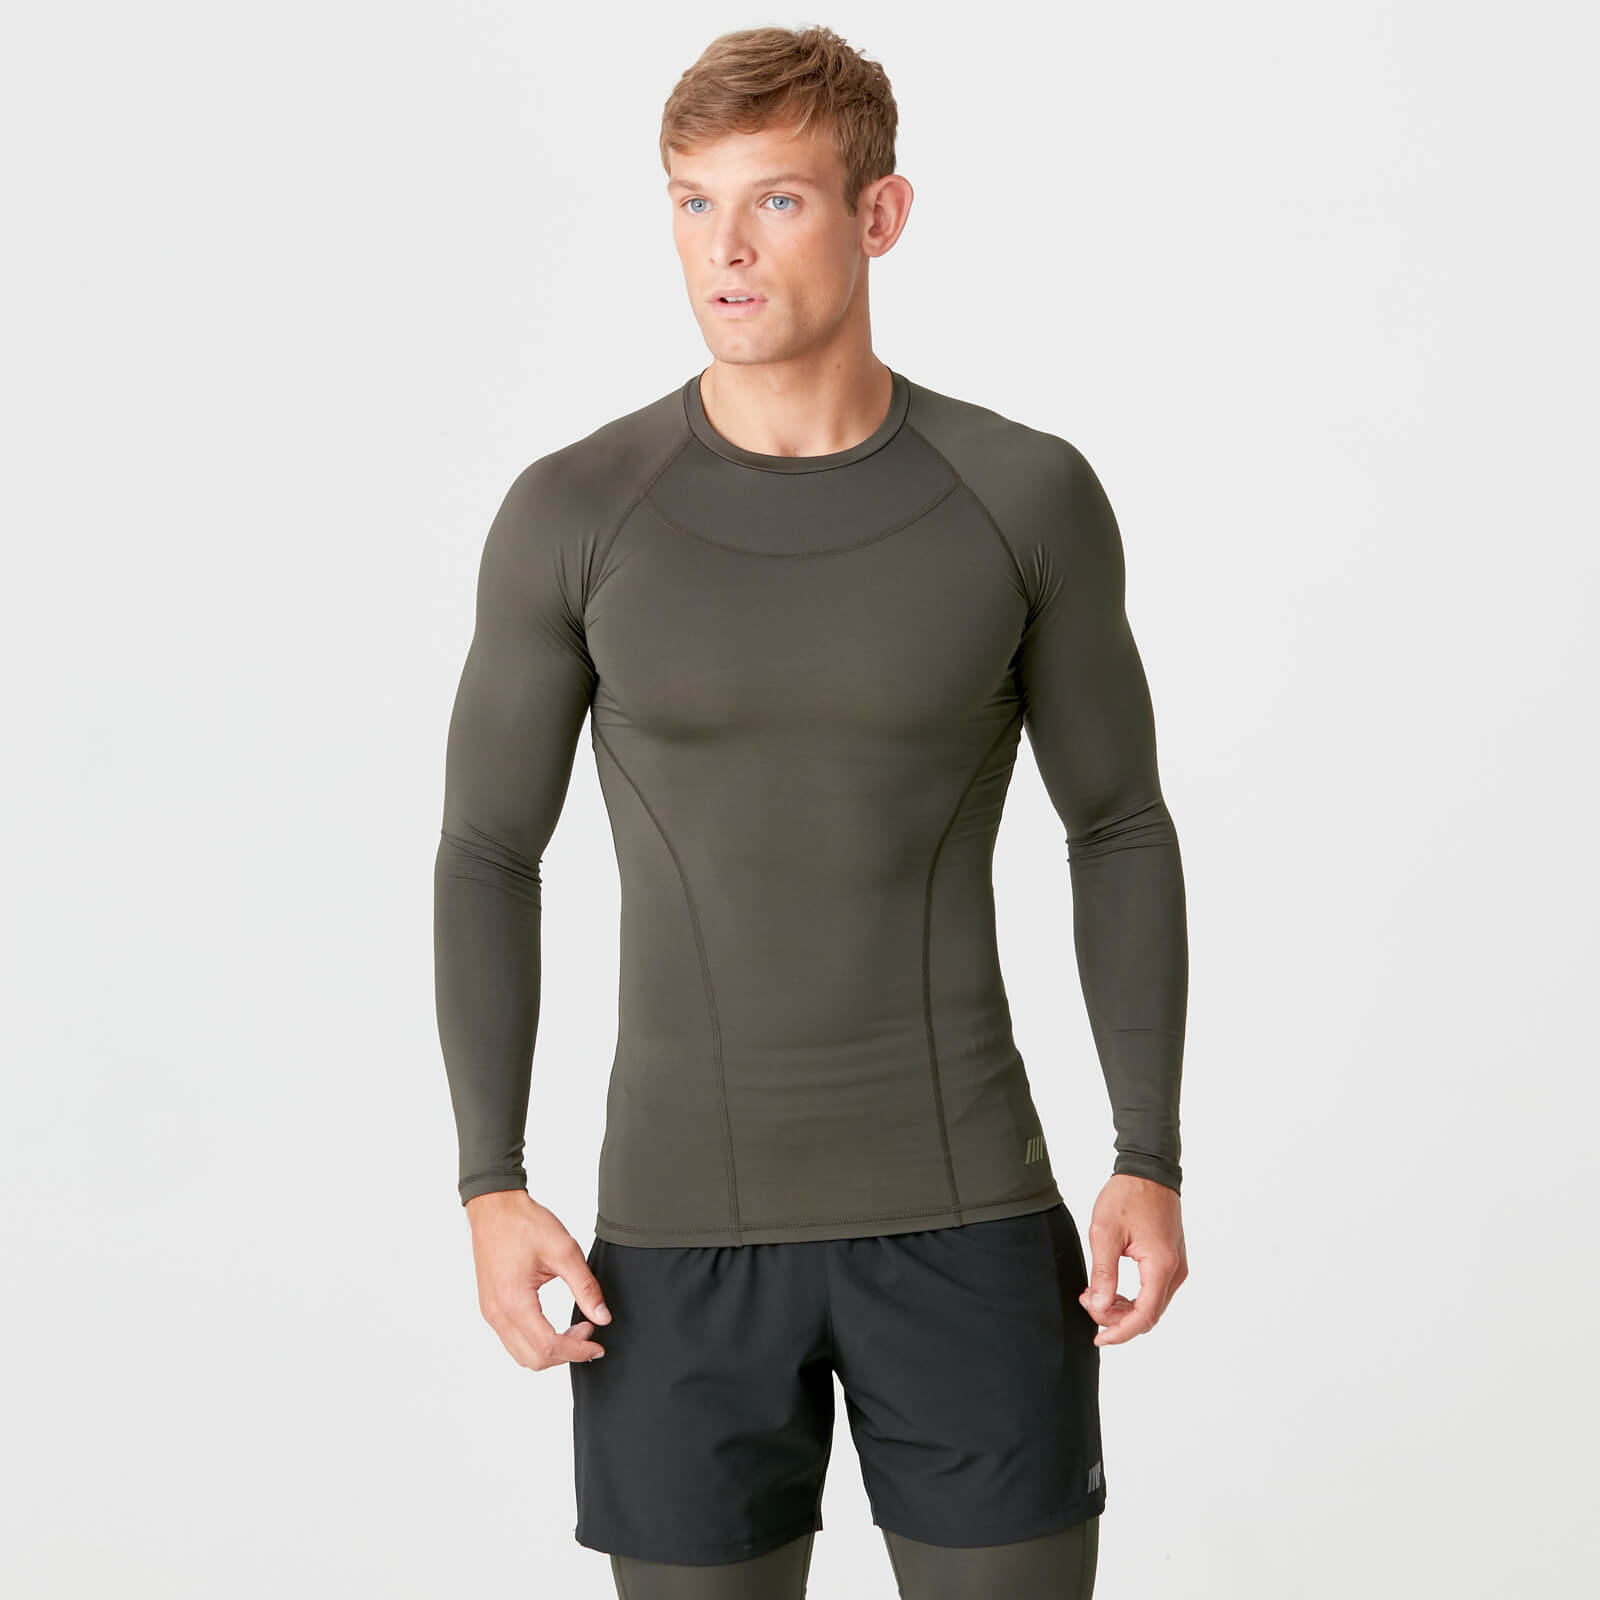 Charge Compression Long Sleeve Top - Dark Khaki - S